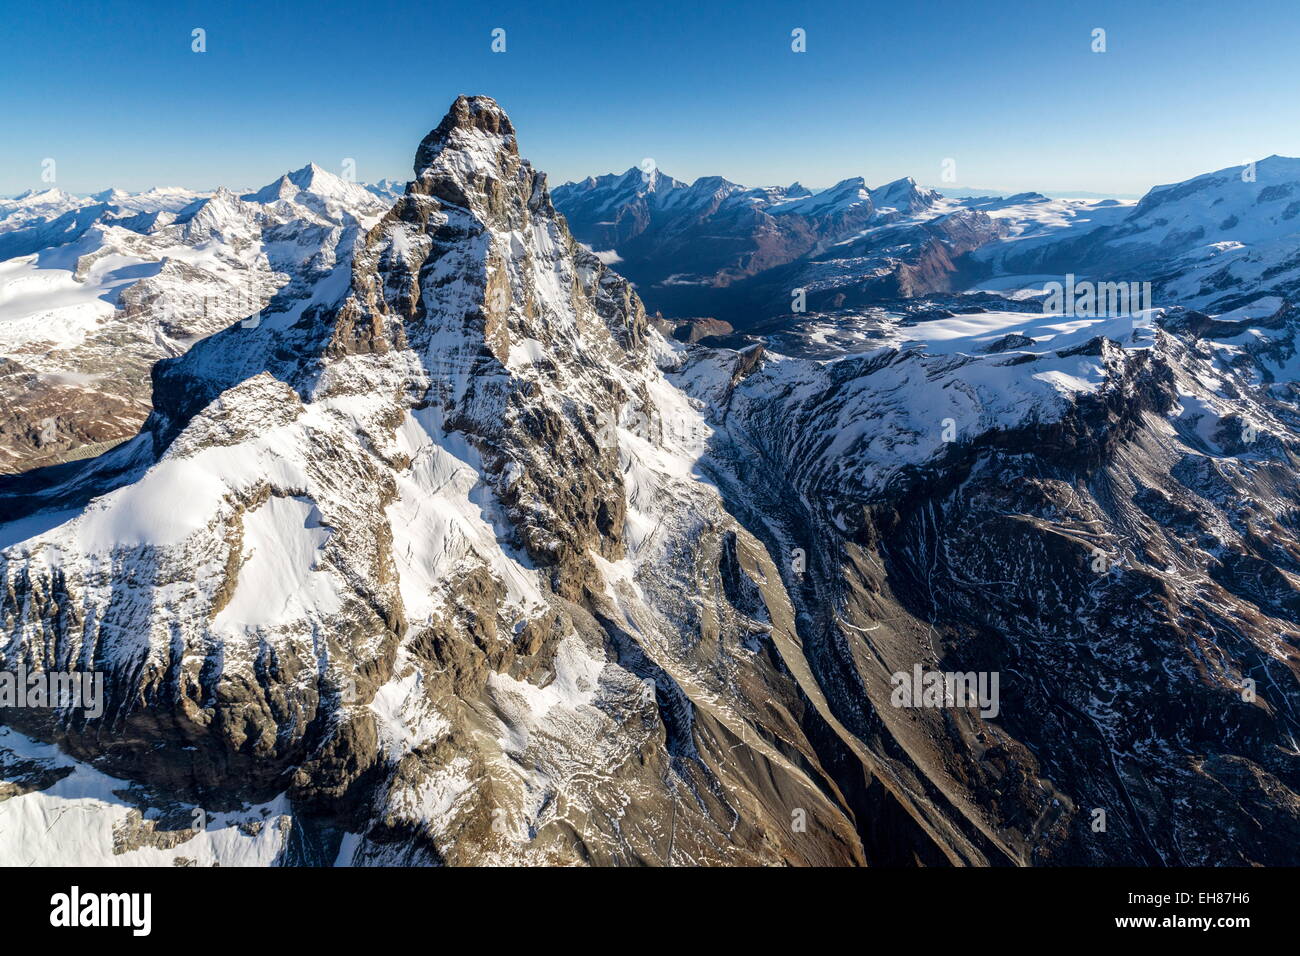 The Matterhorn surrounded by its mountain range covered in snow, Swiss Canton of Valais, Swiss Alps, Switzerland Stock Photo